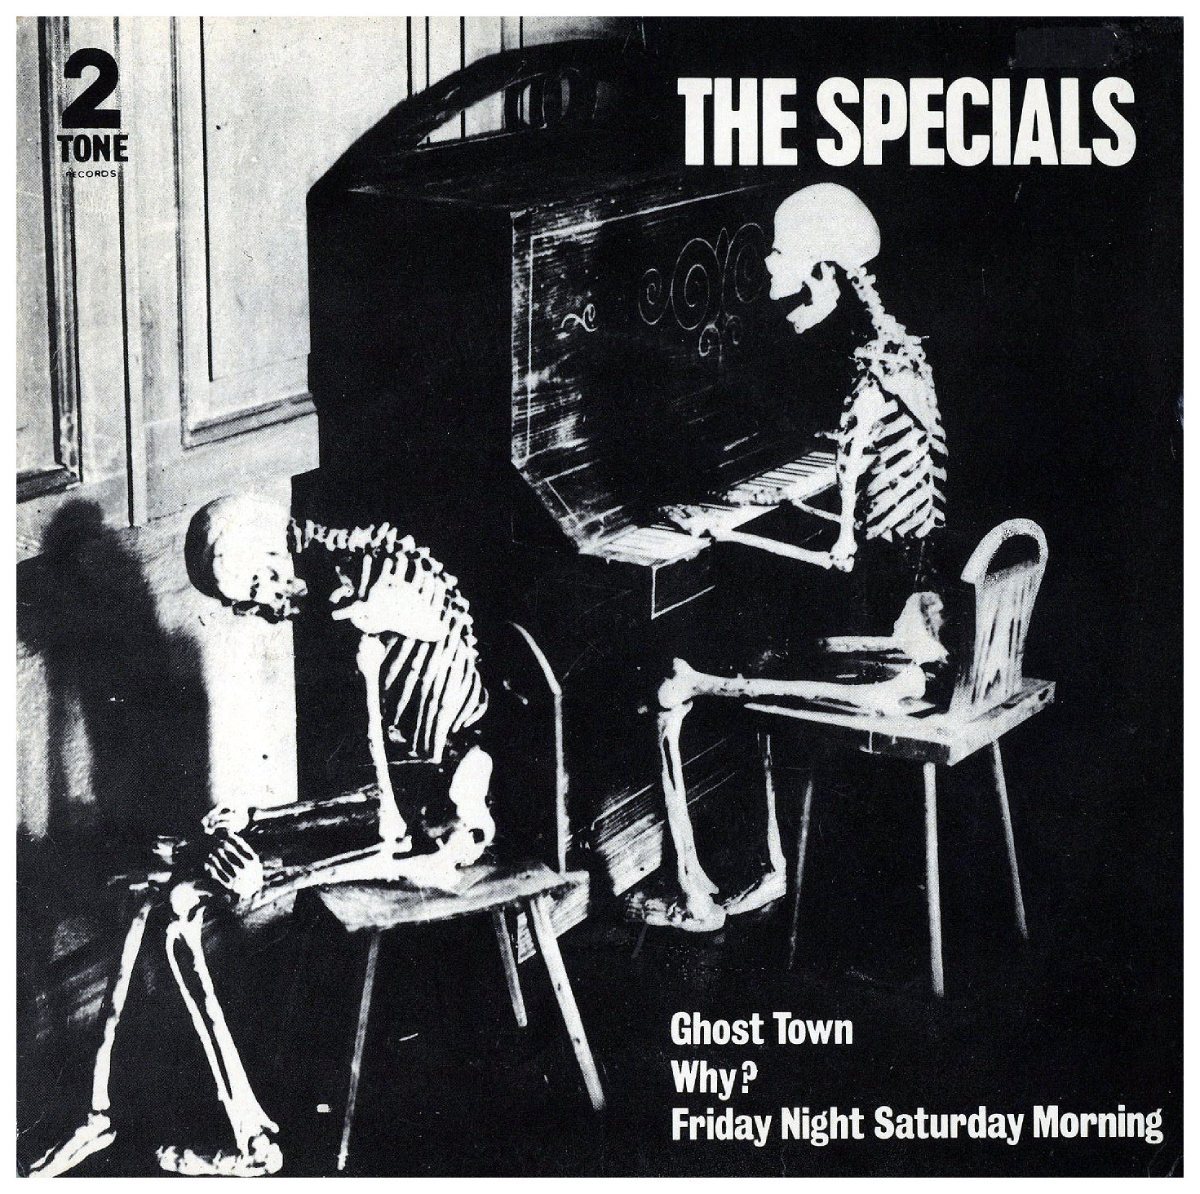 Cover of the single "Ghost Town" by The Specials.